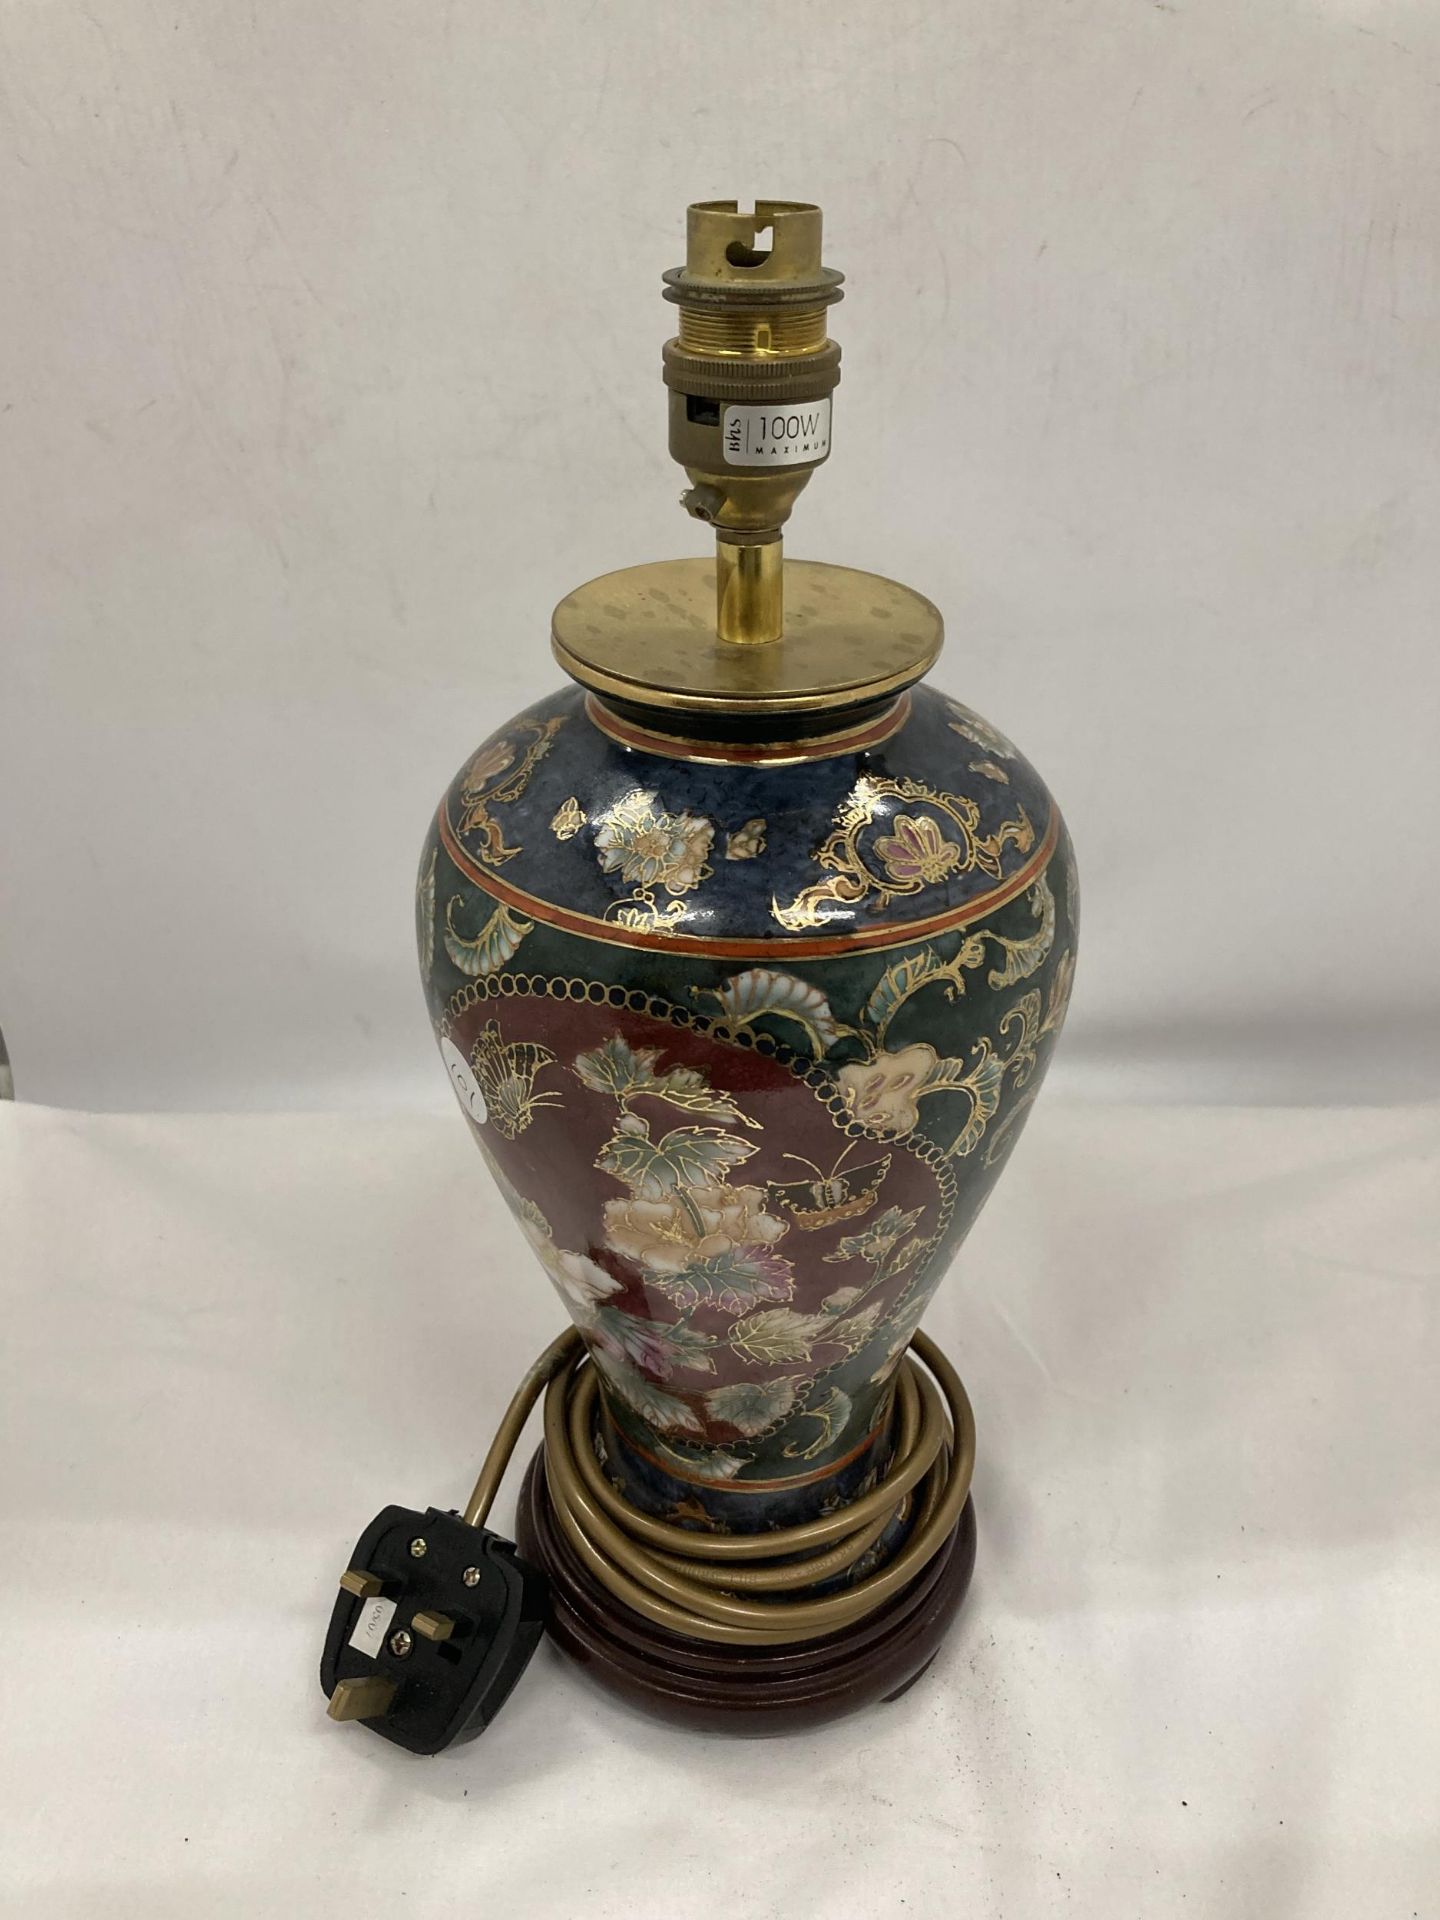 AN ORIENTAL STYLE CERAMIC TABLE LAMP ON A WOODEN BASE, HEIGHT 28CM